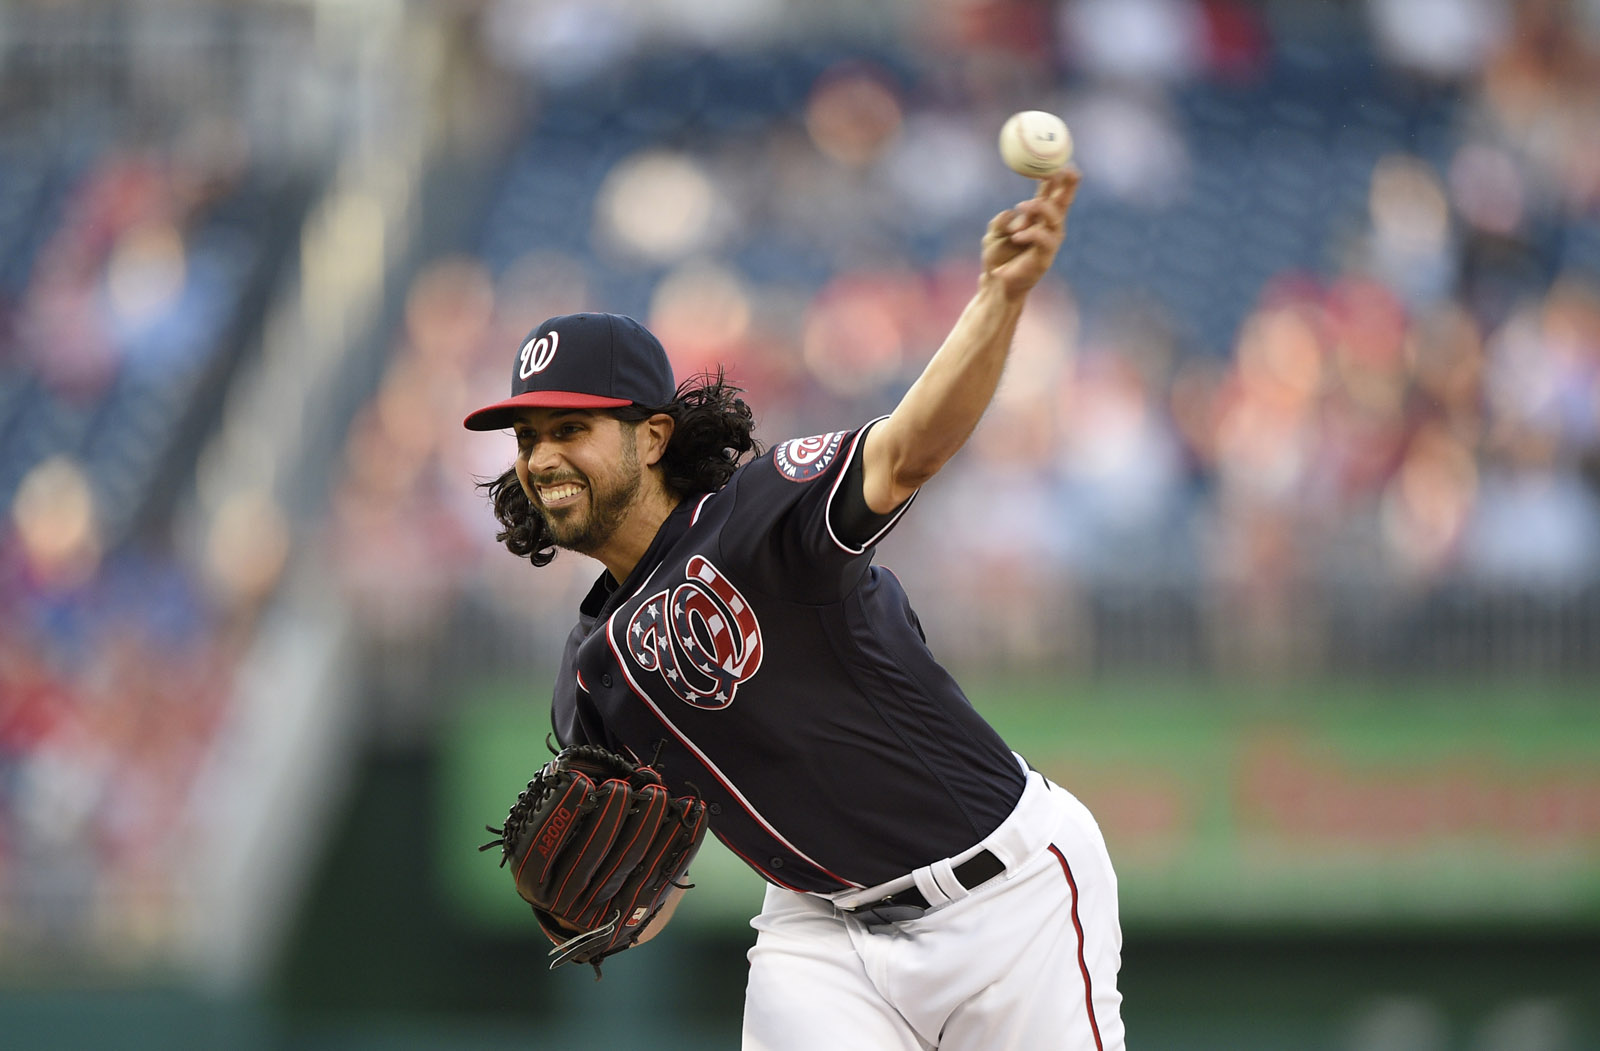 Washington Nationals starting pitcher Gio Gonzalez delivers during the first inning of a baseball game against the Miami Marlins, Friday, May 13, 2016, in Washington. (AP Photo/Nick Wass)